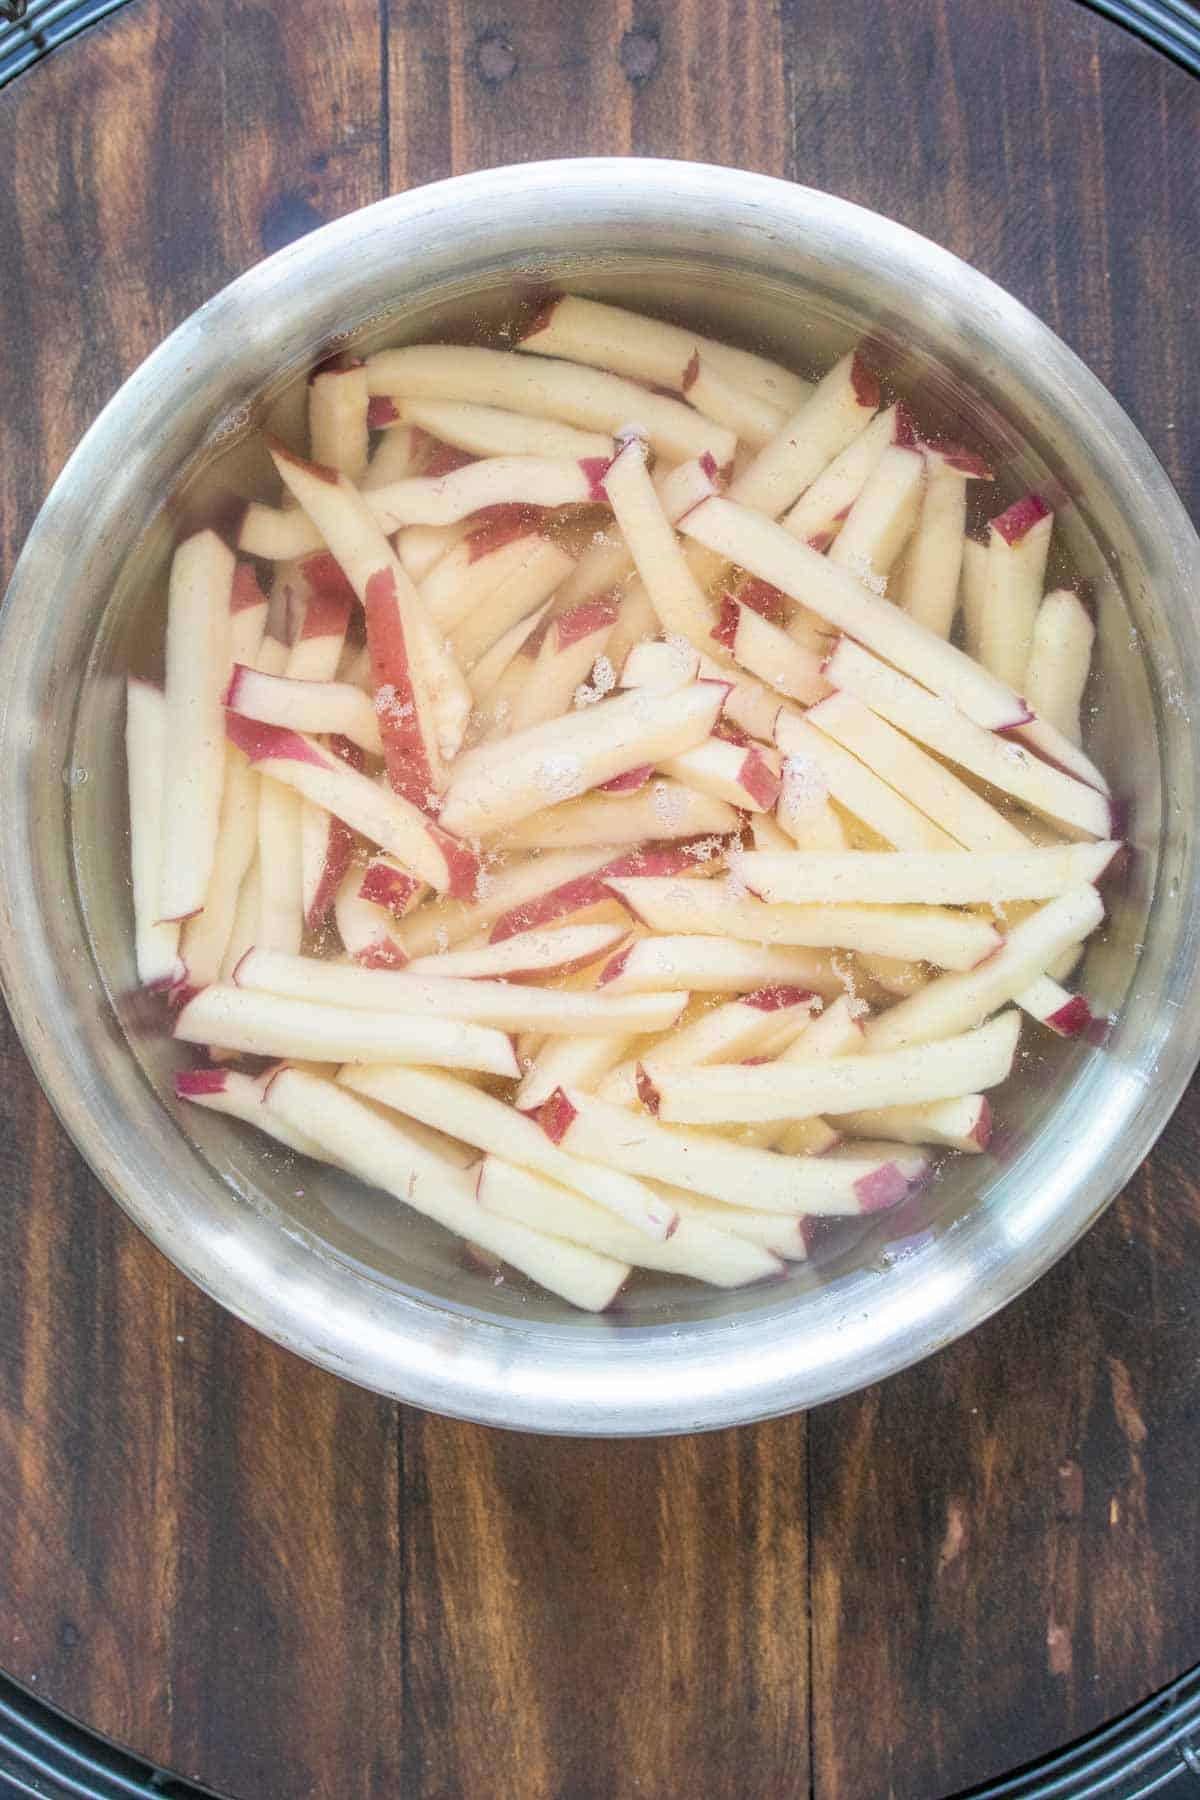 Raw french fries soaking in a stainless steel bowl of water.